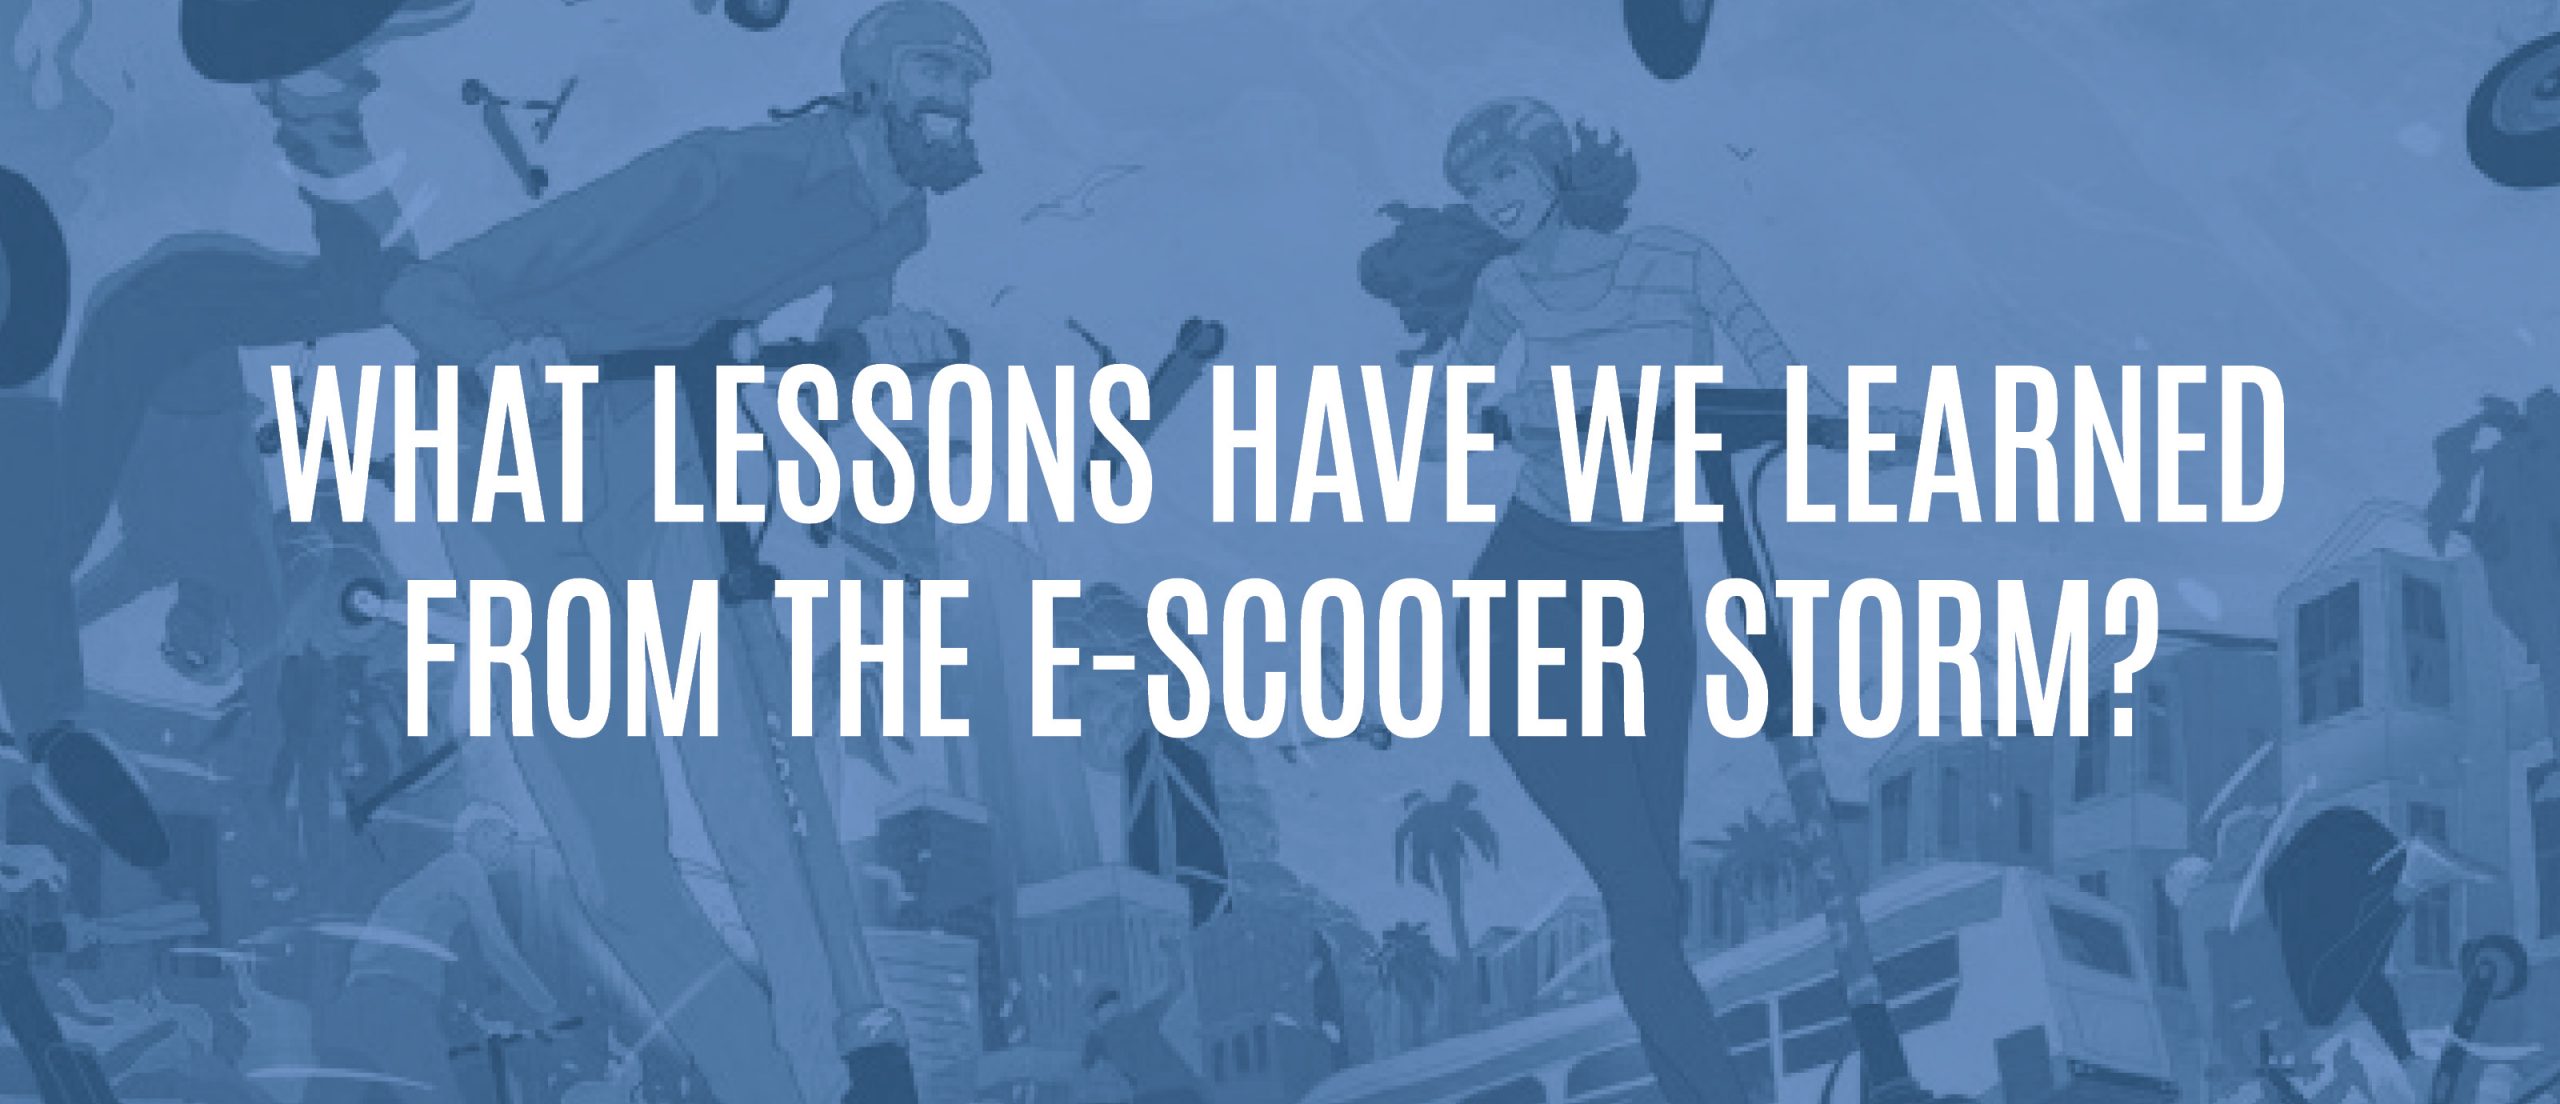 Blog Title - What lessons have we learned from the e-scooter storm?